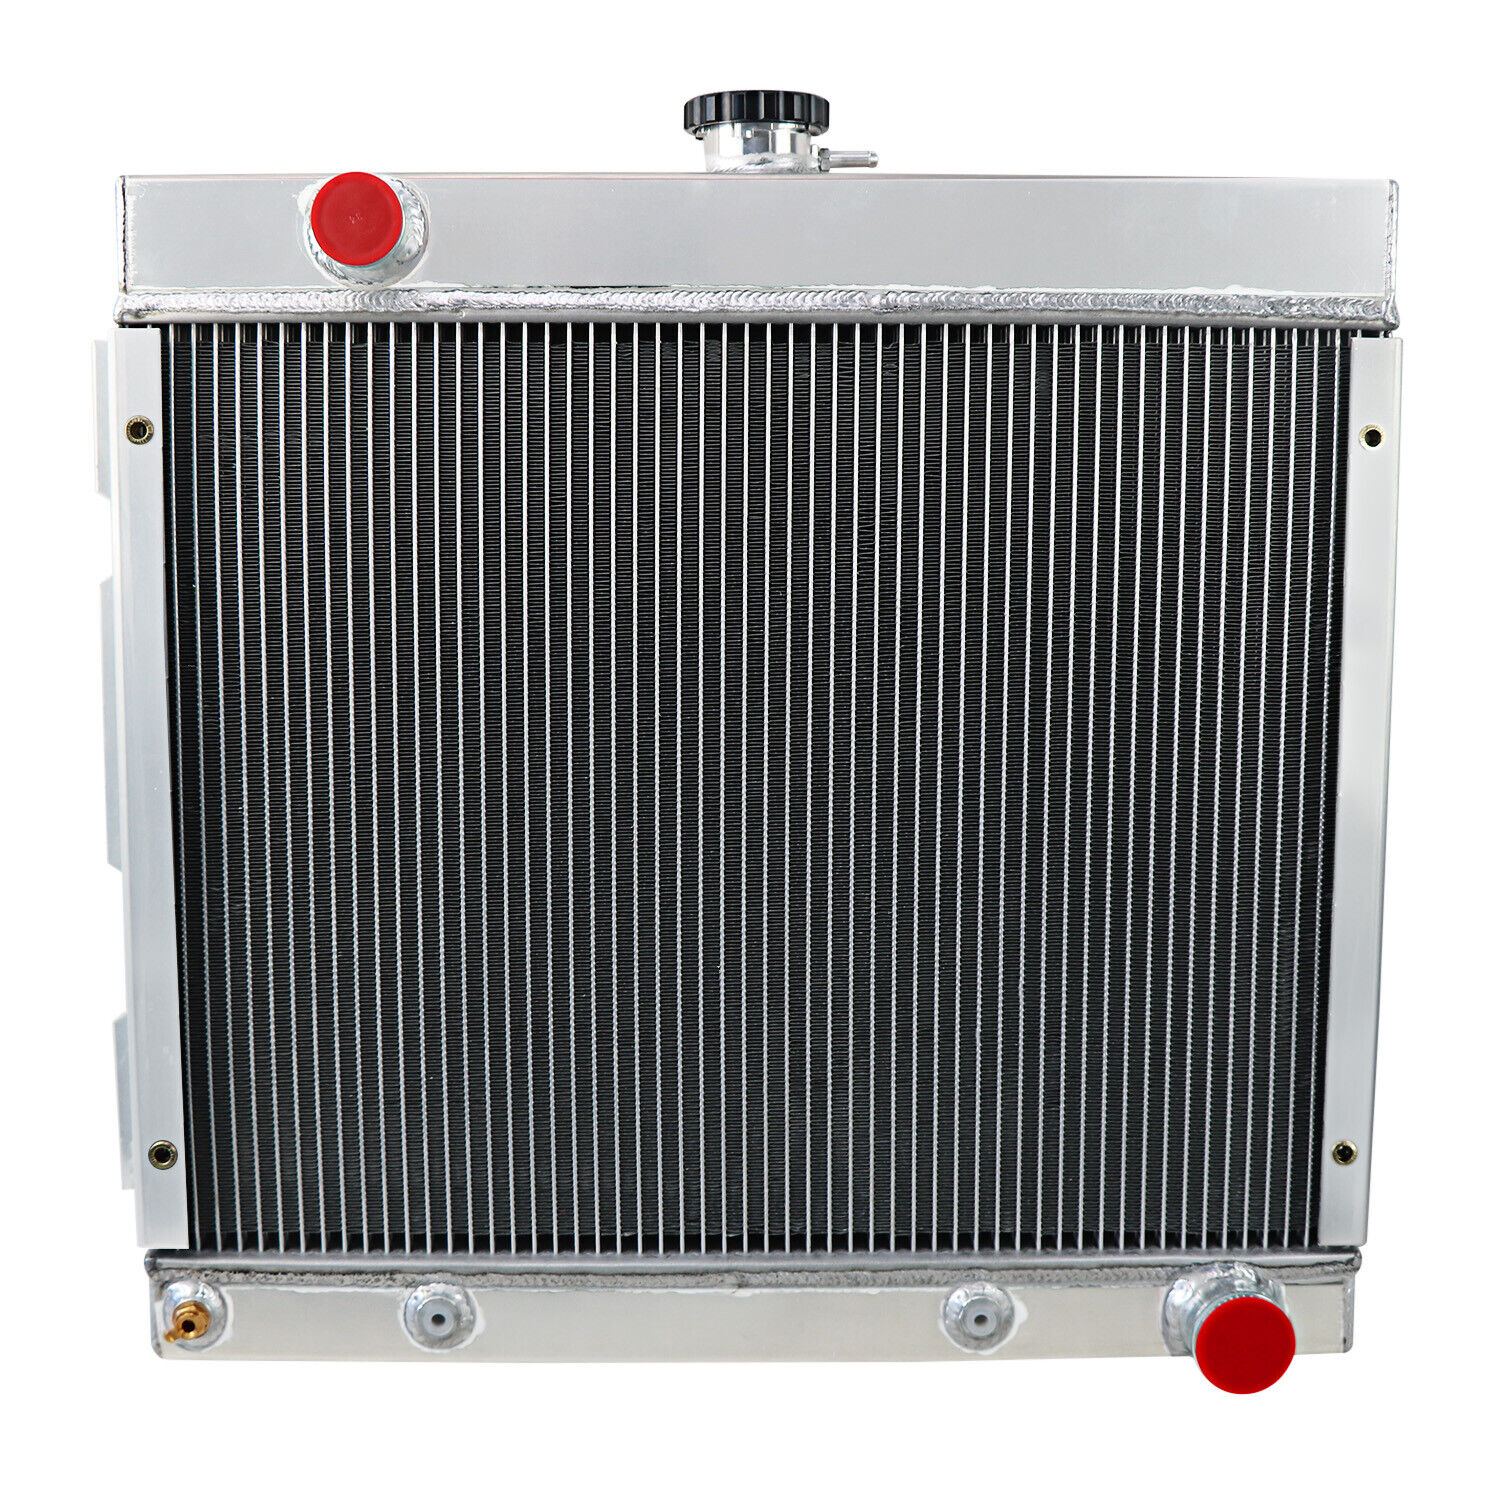 4 Row Radiator For Dodge Dart Plymouth Duster Valiant 5.2L 5.6L V8 AT MT 71-1972